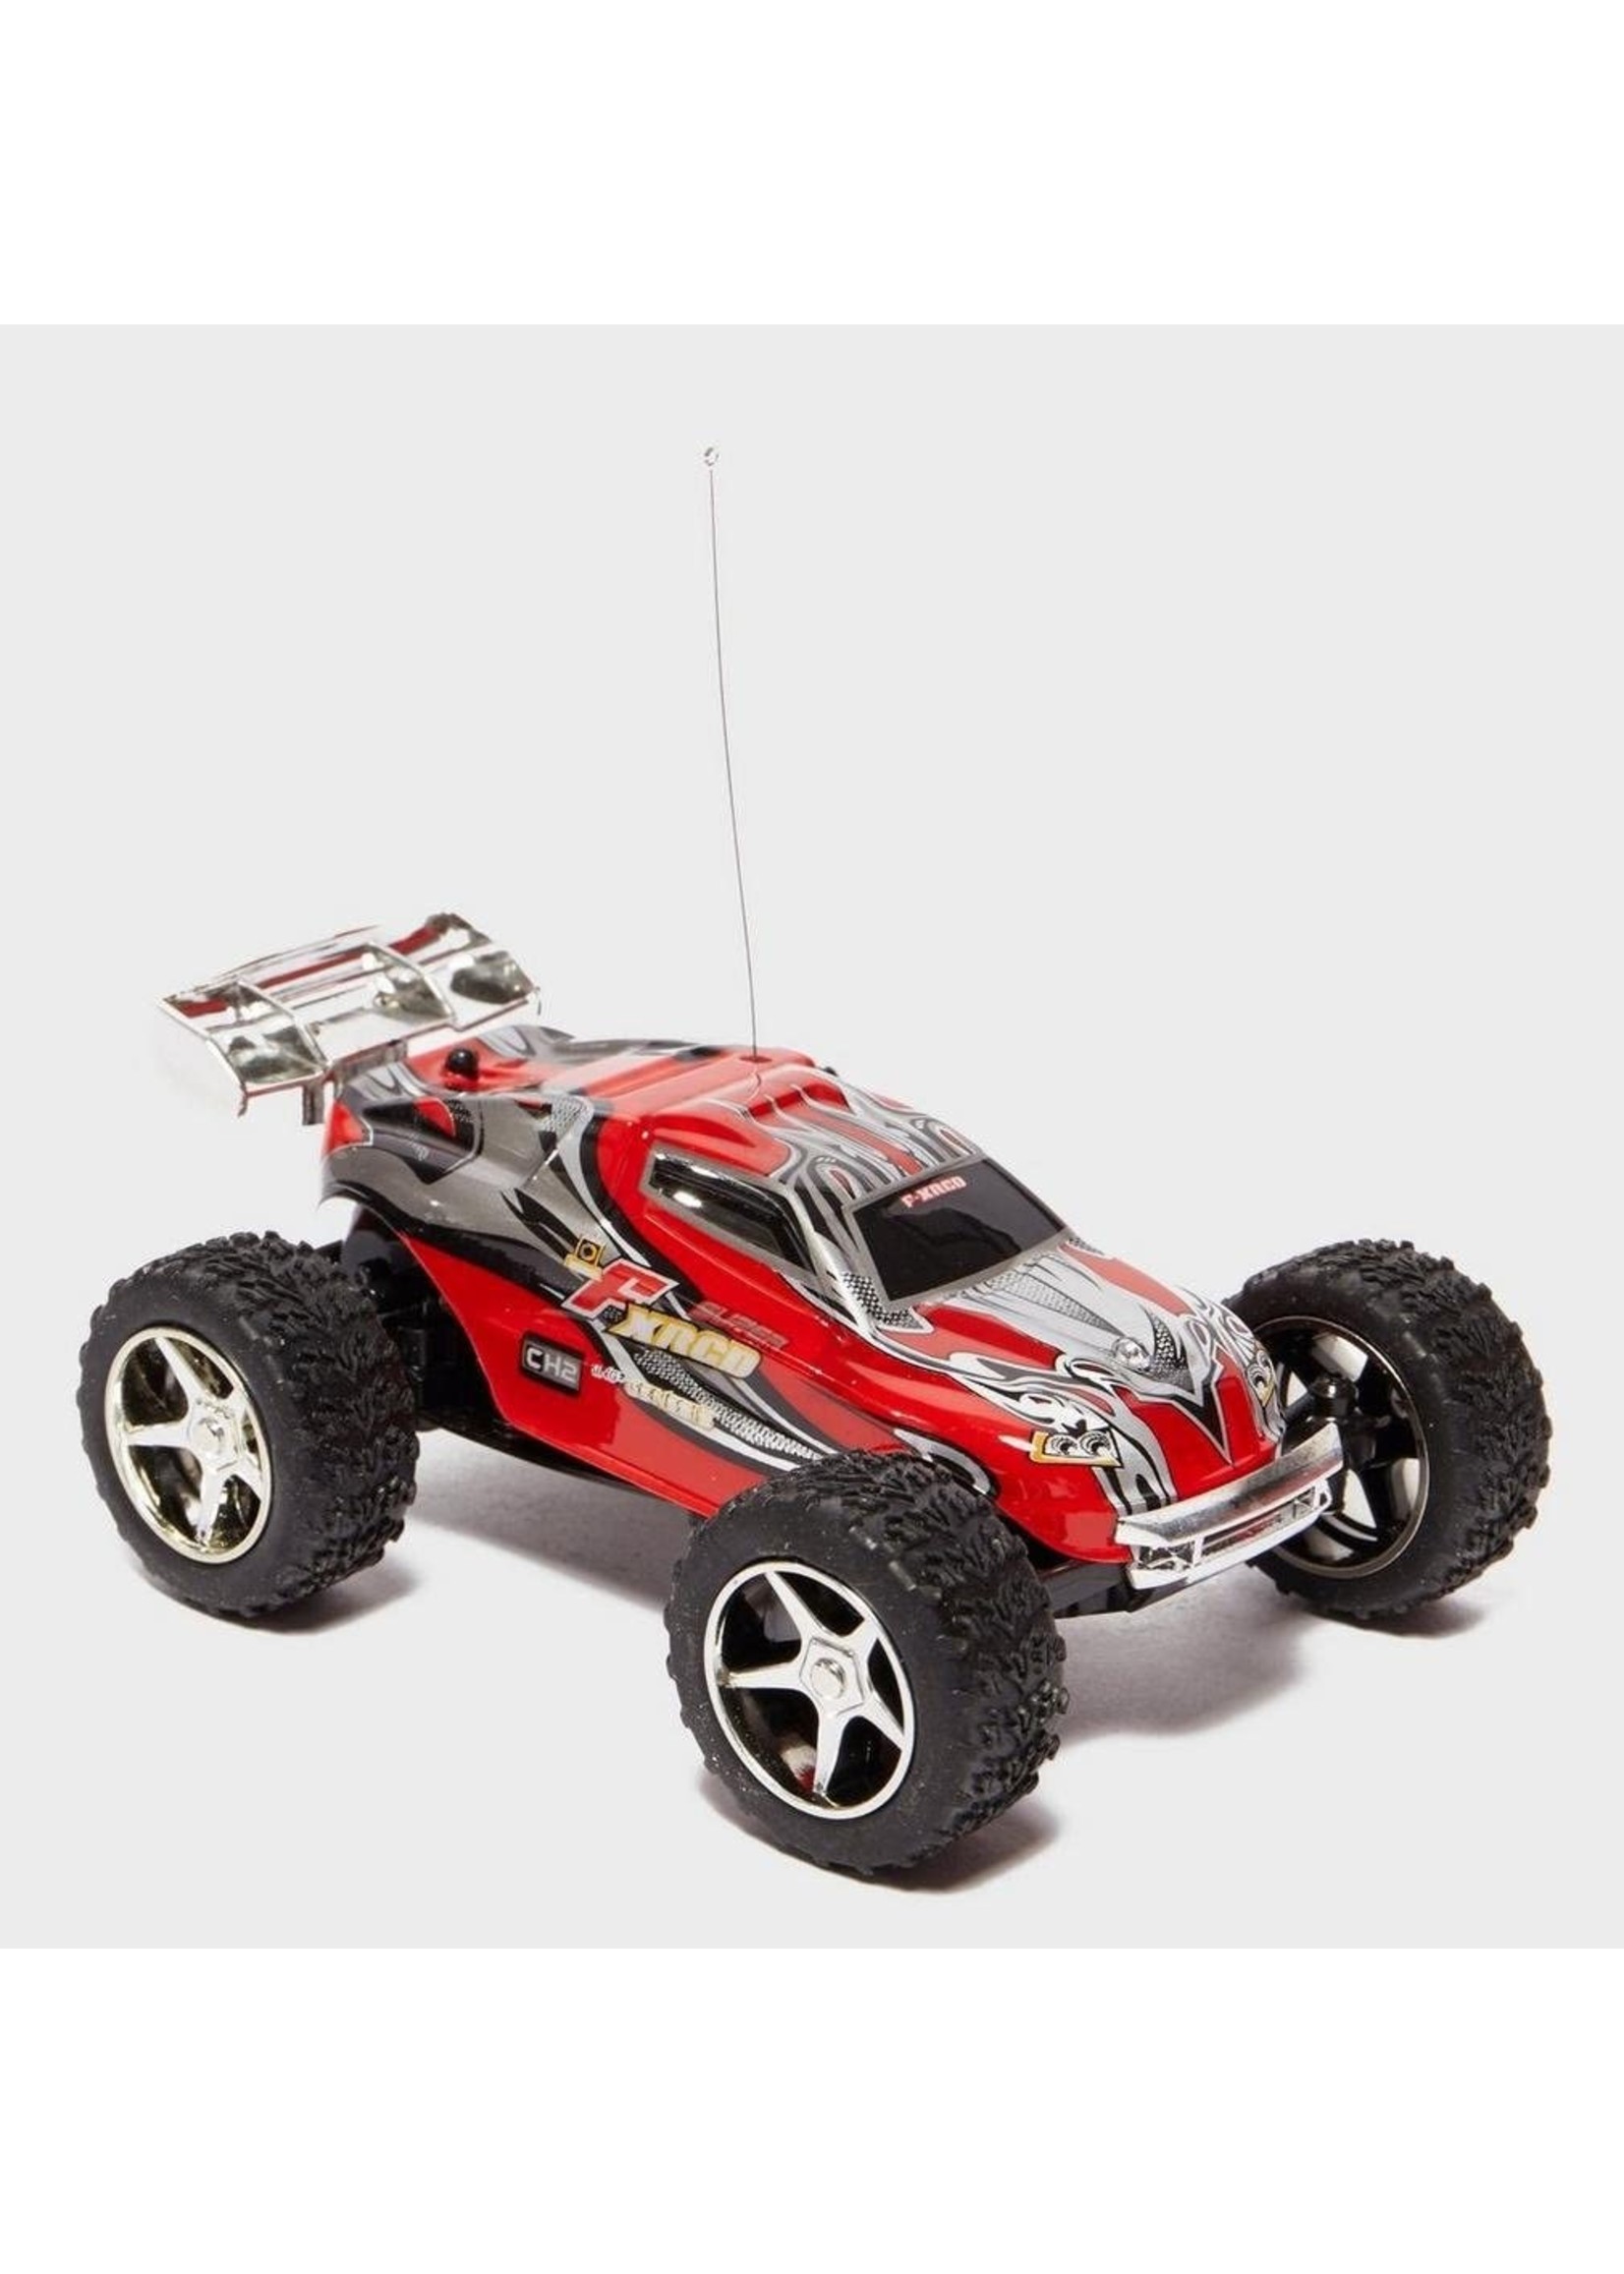 Invento RC High Speed Race Car